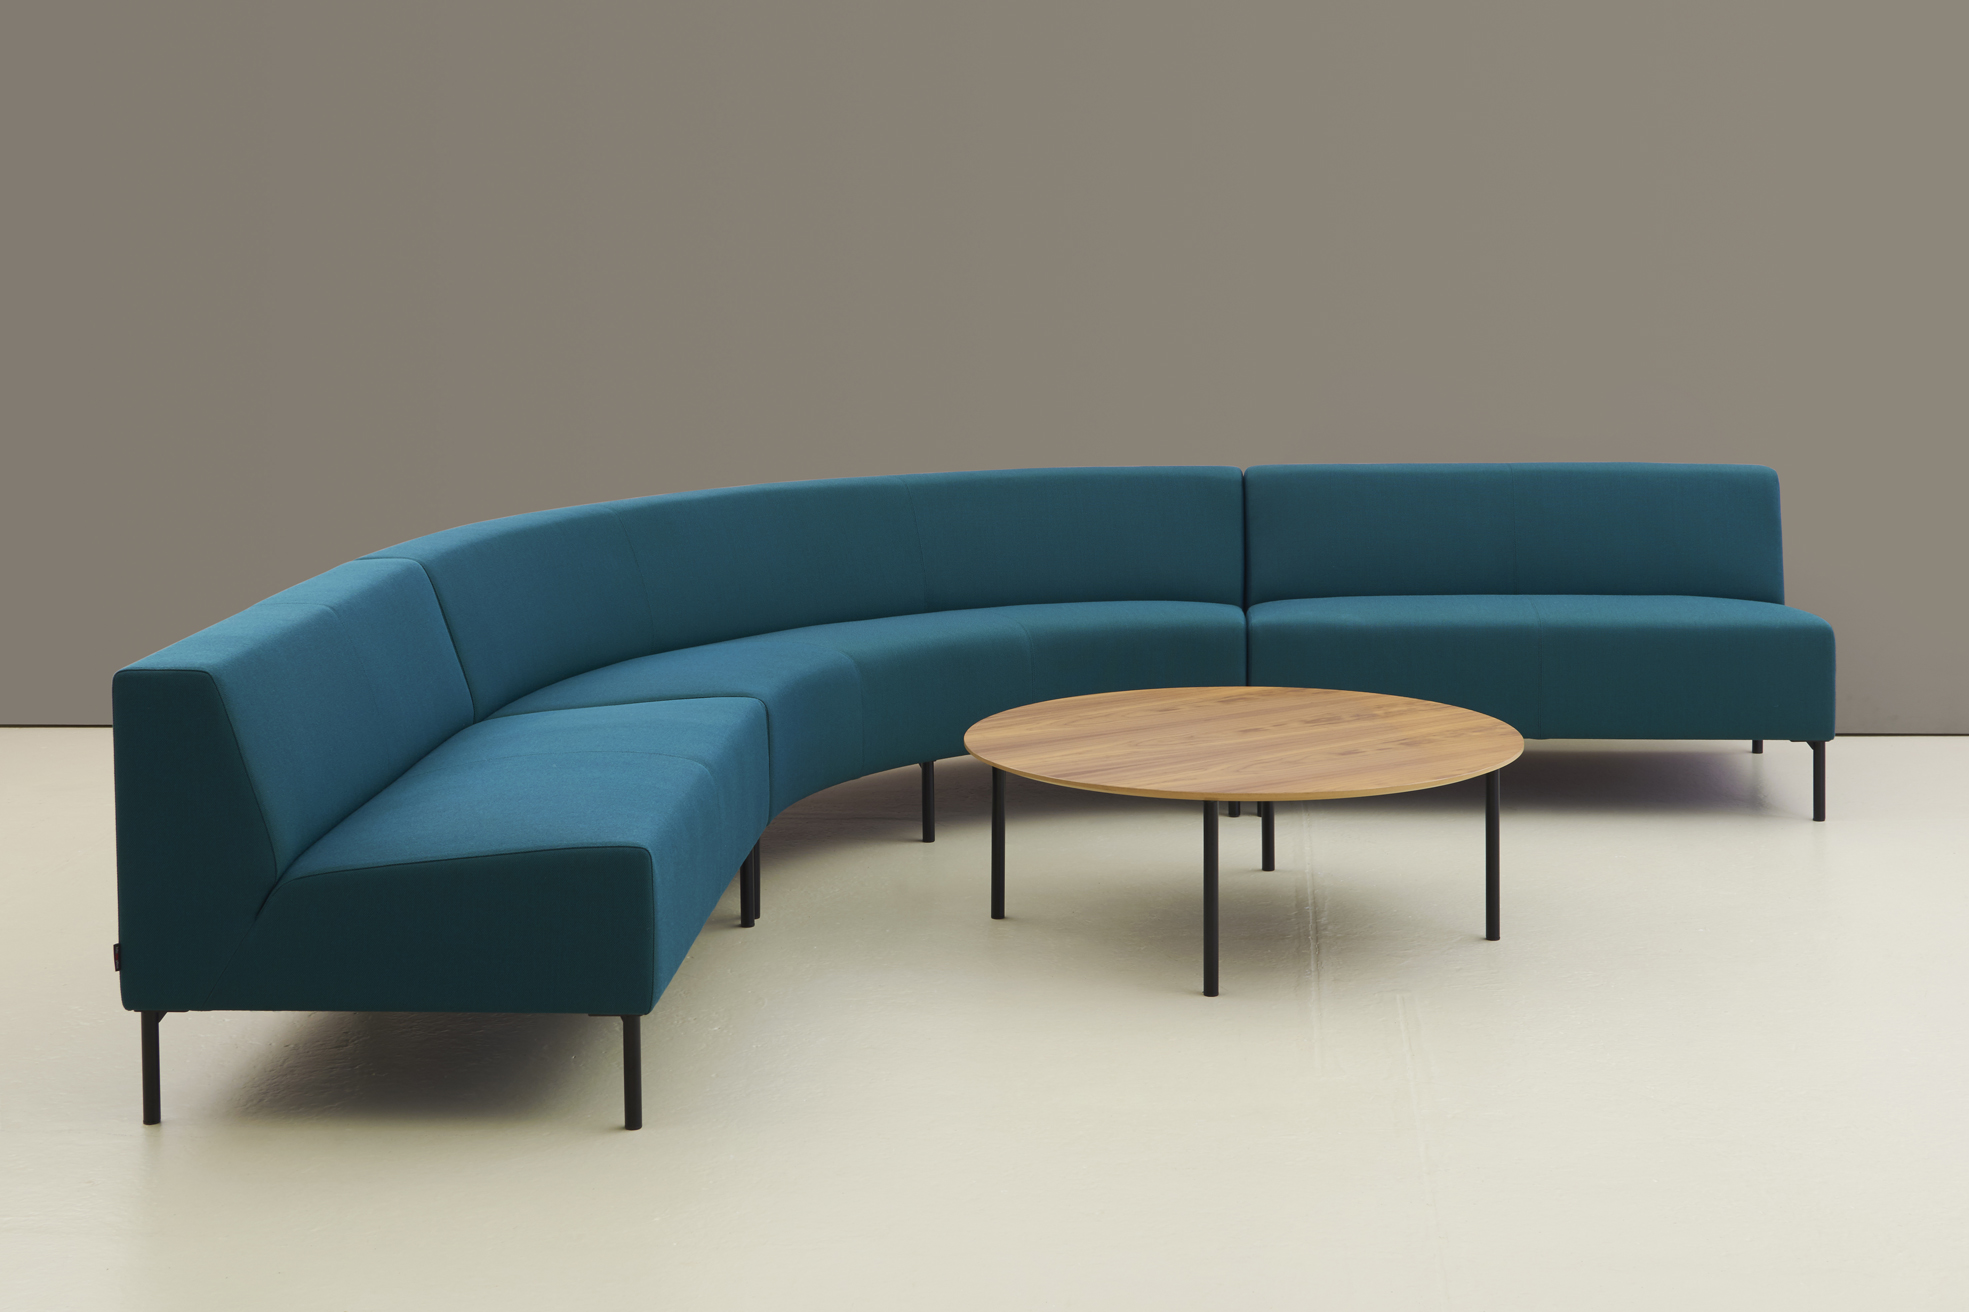 hm18y1 curved sofa, hm18f and hm18z table (2) (low res).jpg